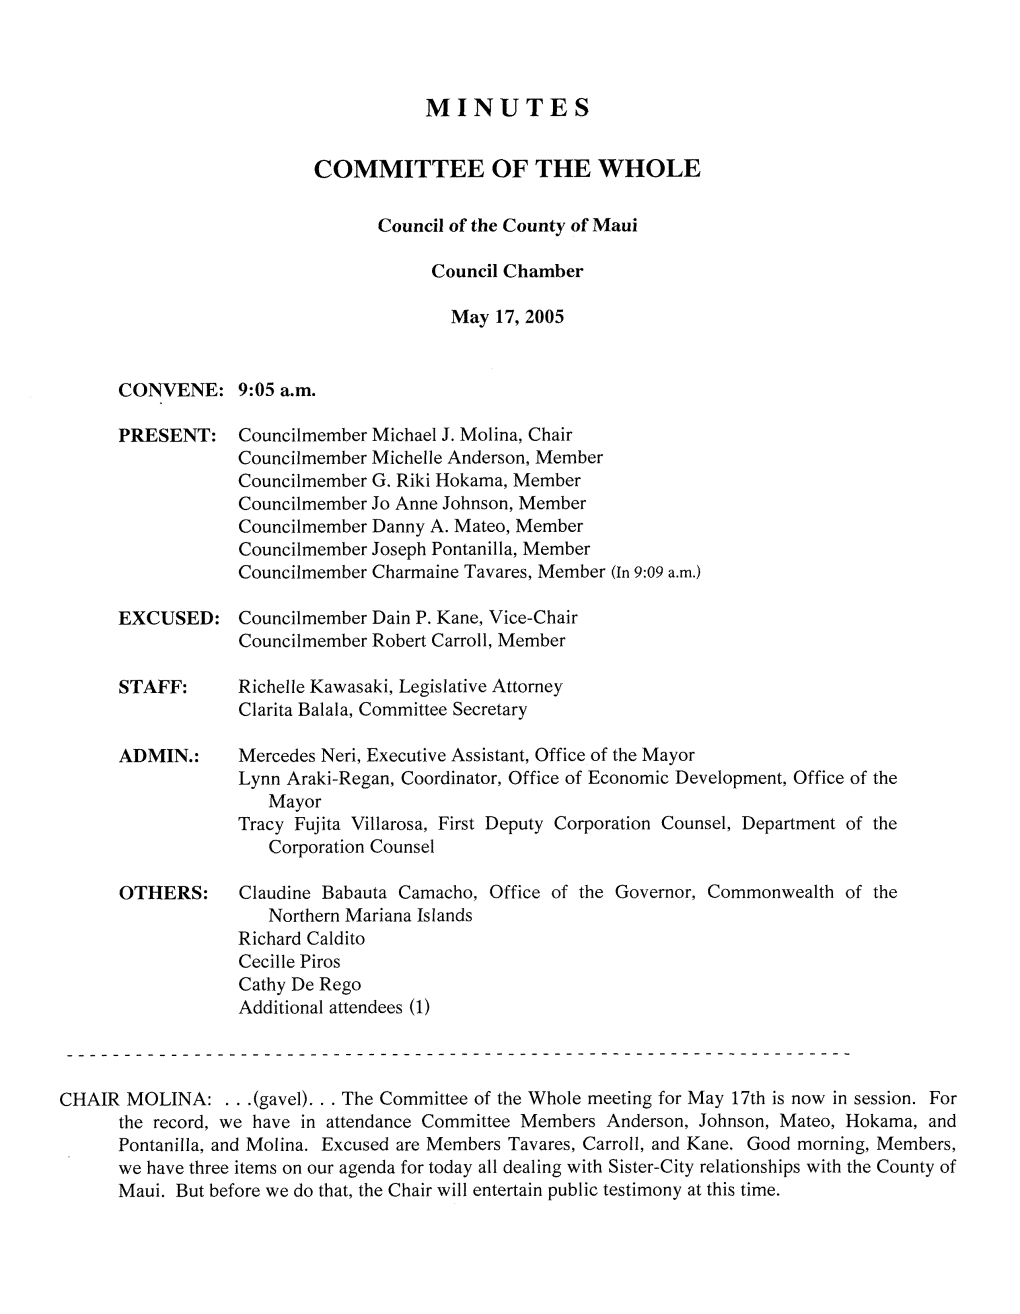 Minutes Committee of the Whole